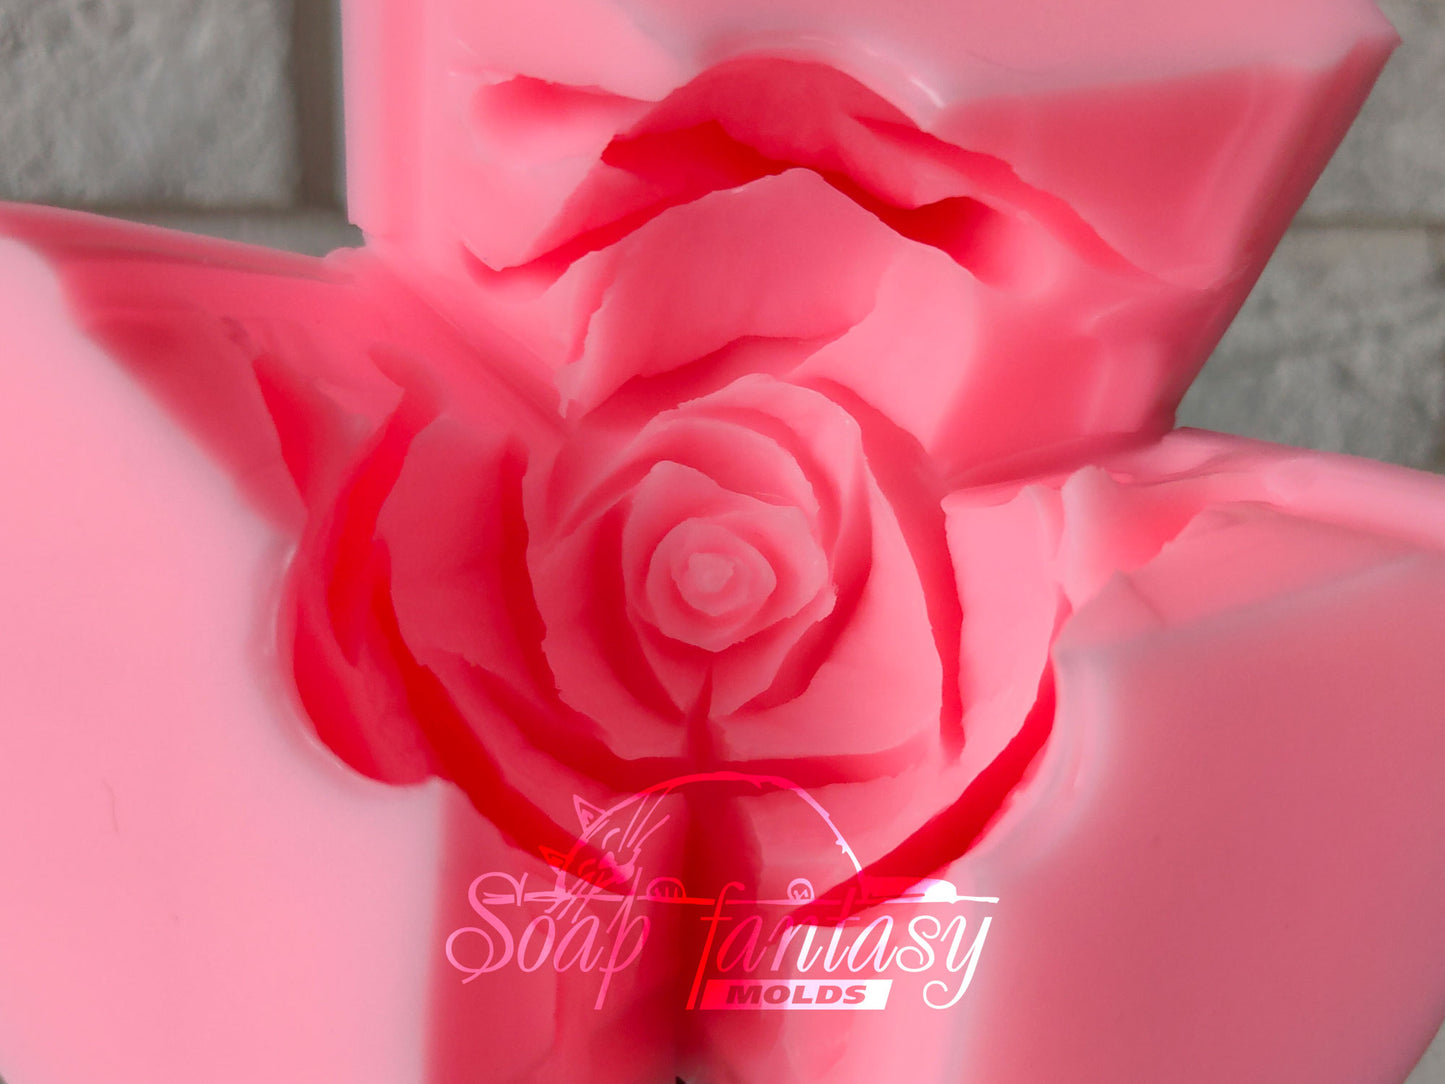 Big rose "Lady in red" silicone mold for soap making